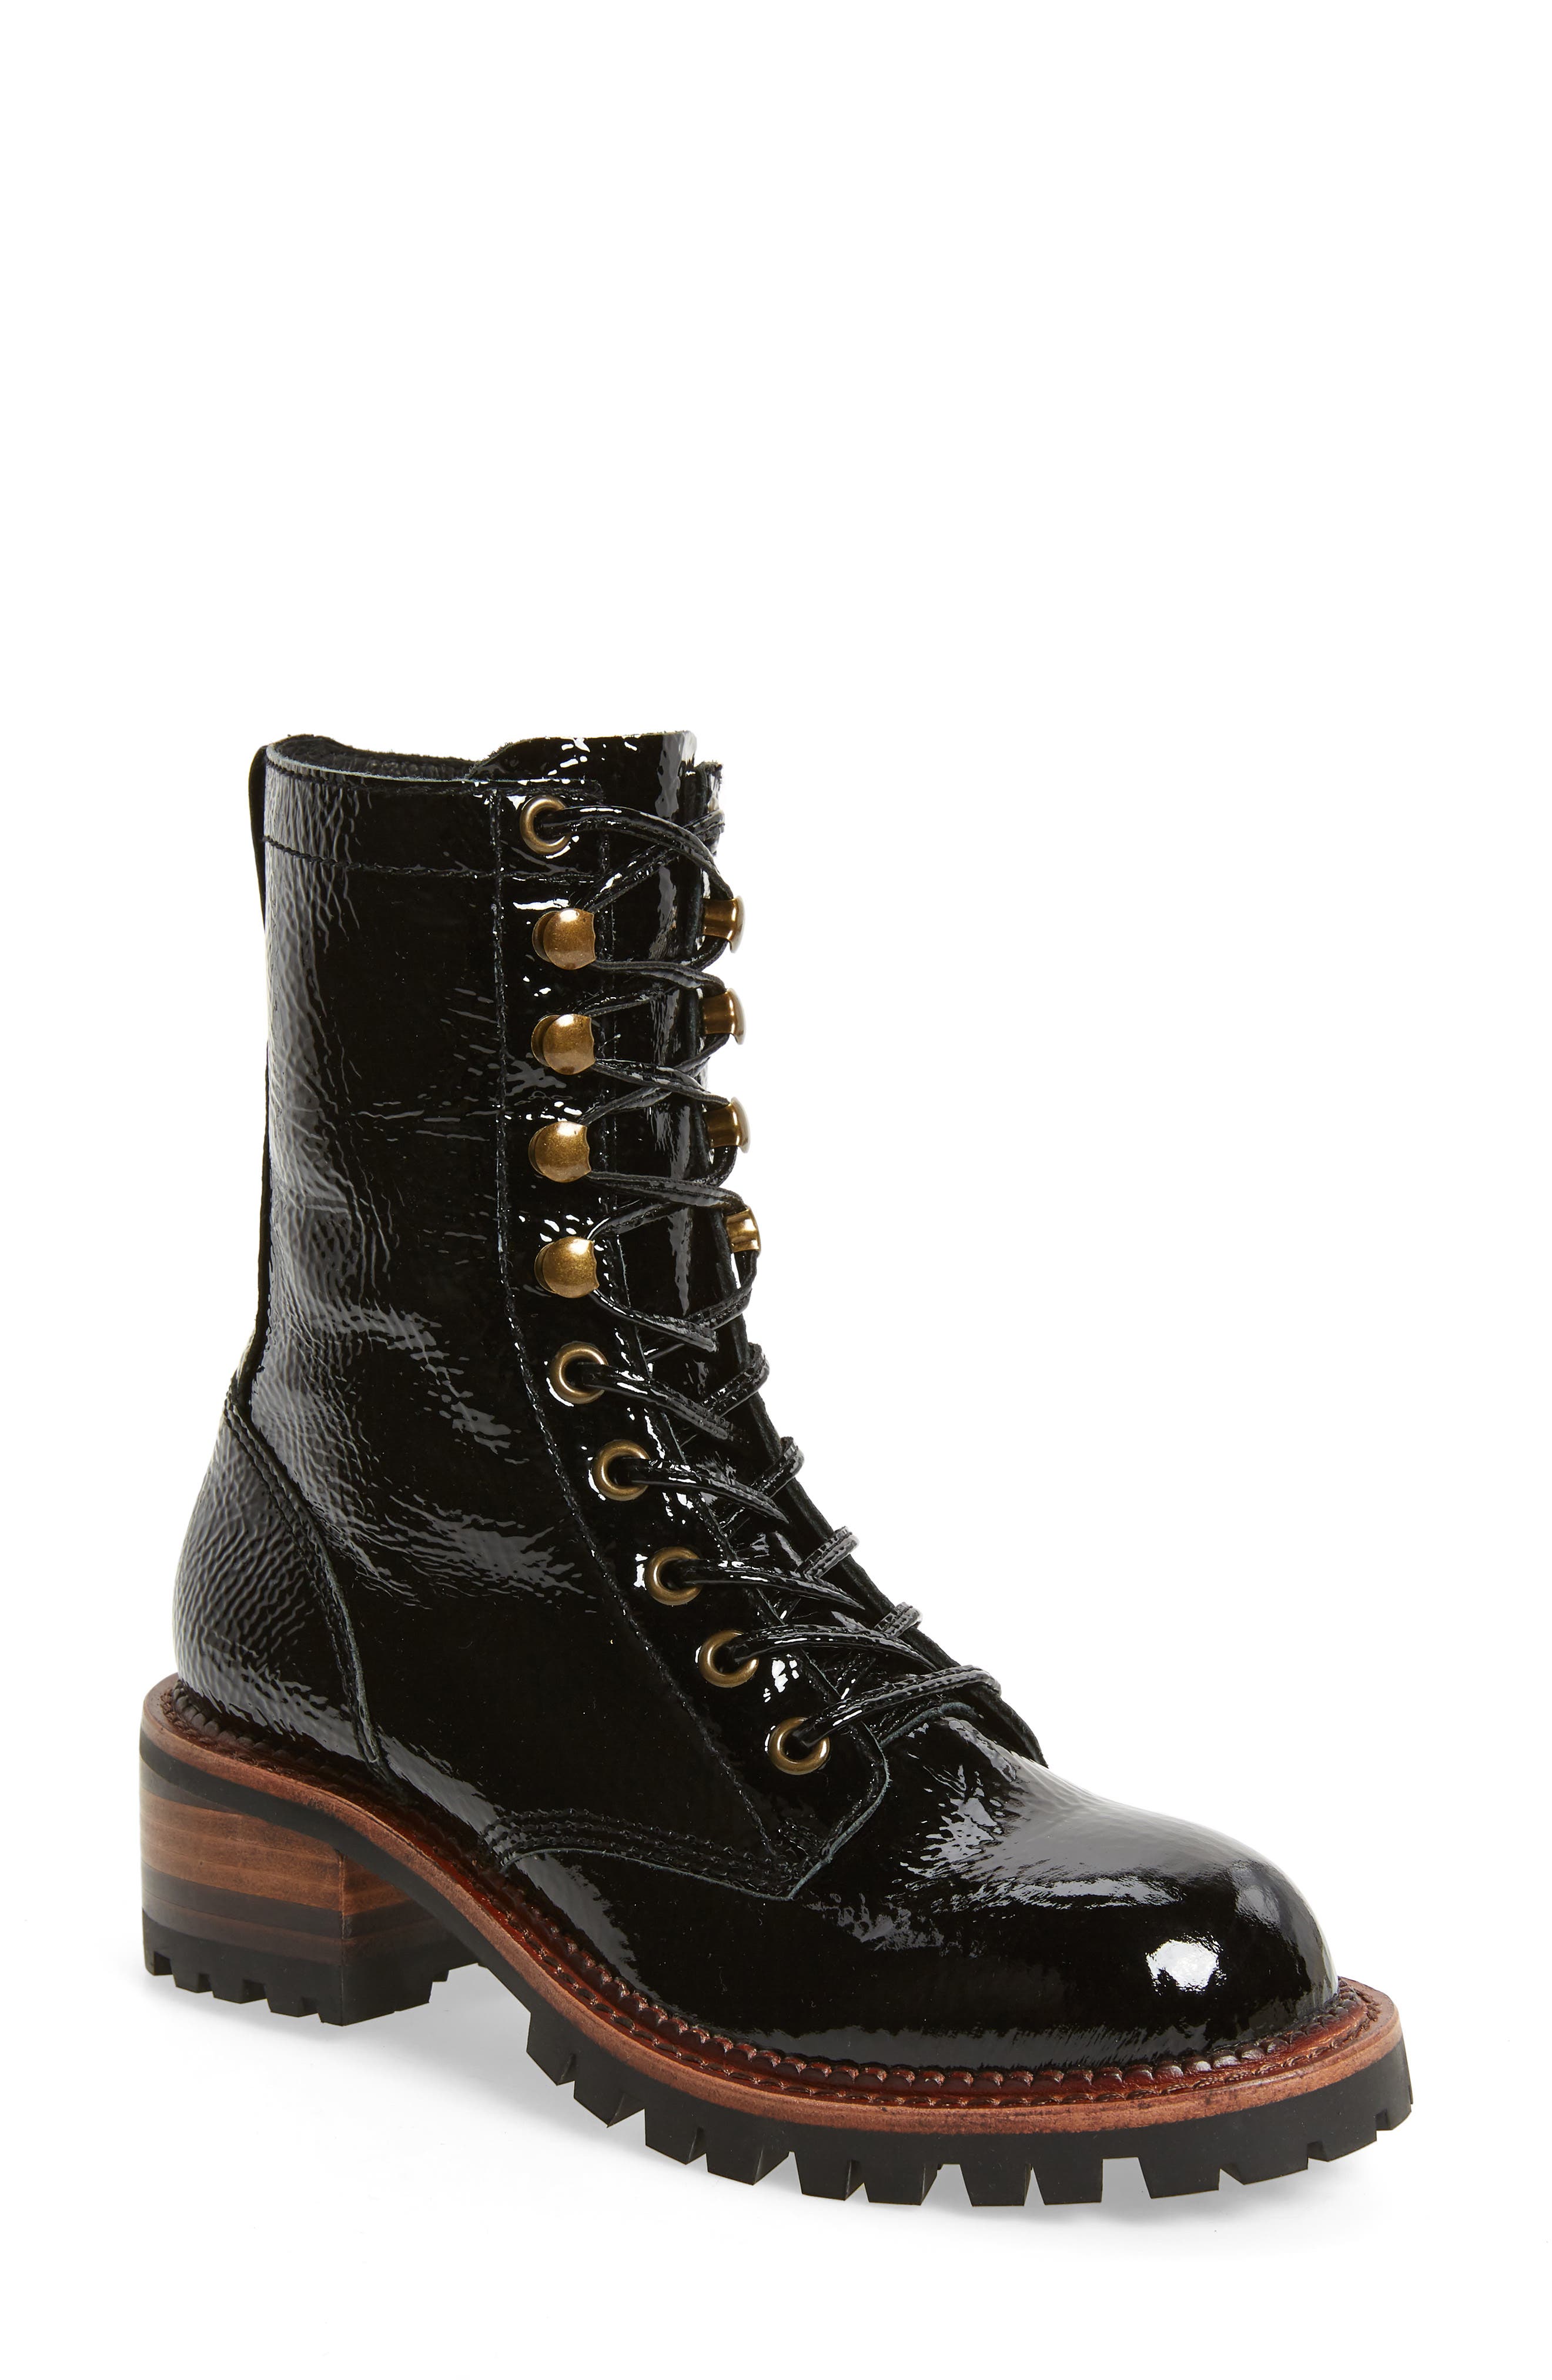 crinkle patent leather boots